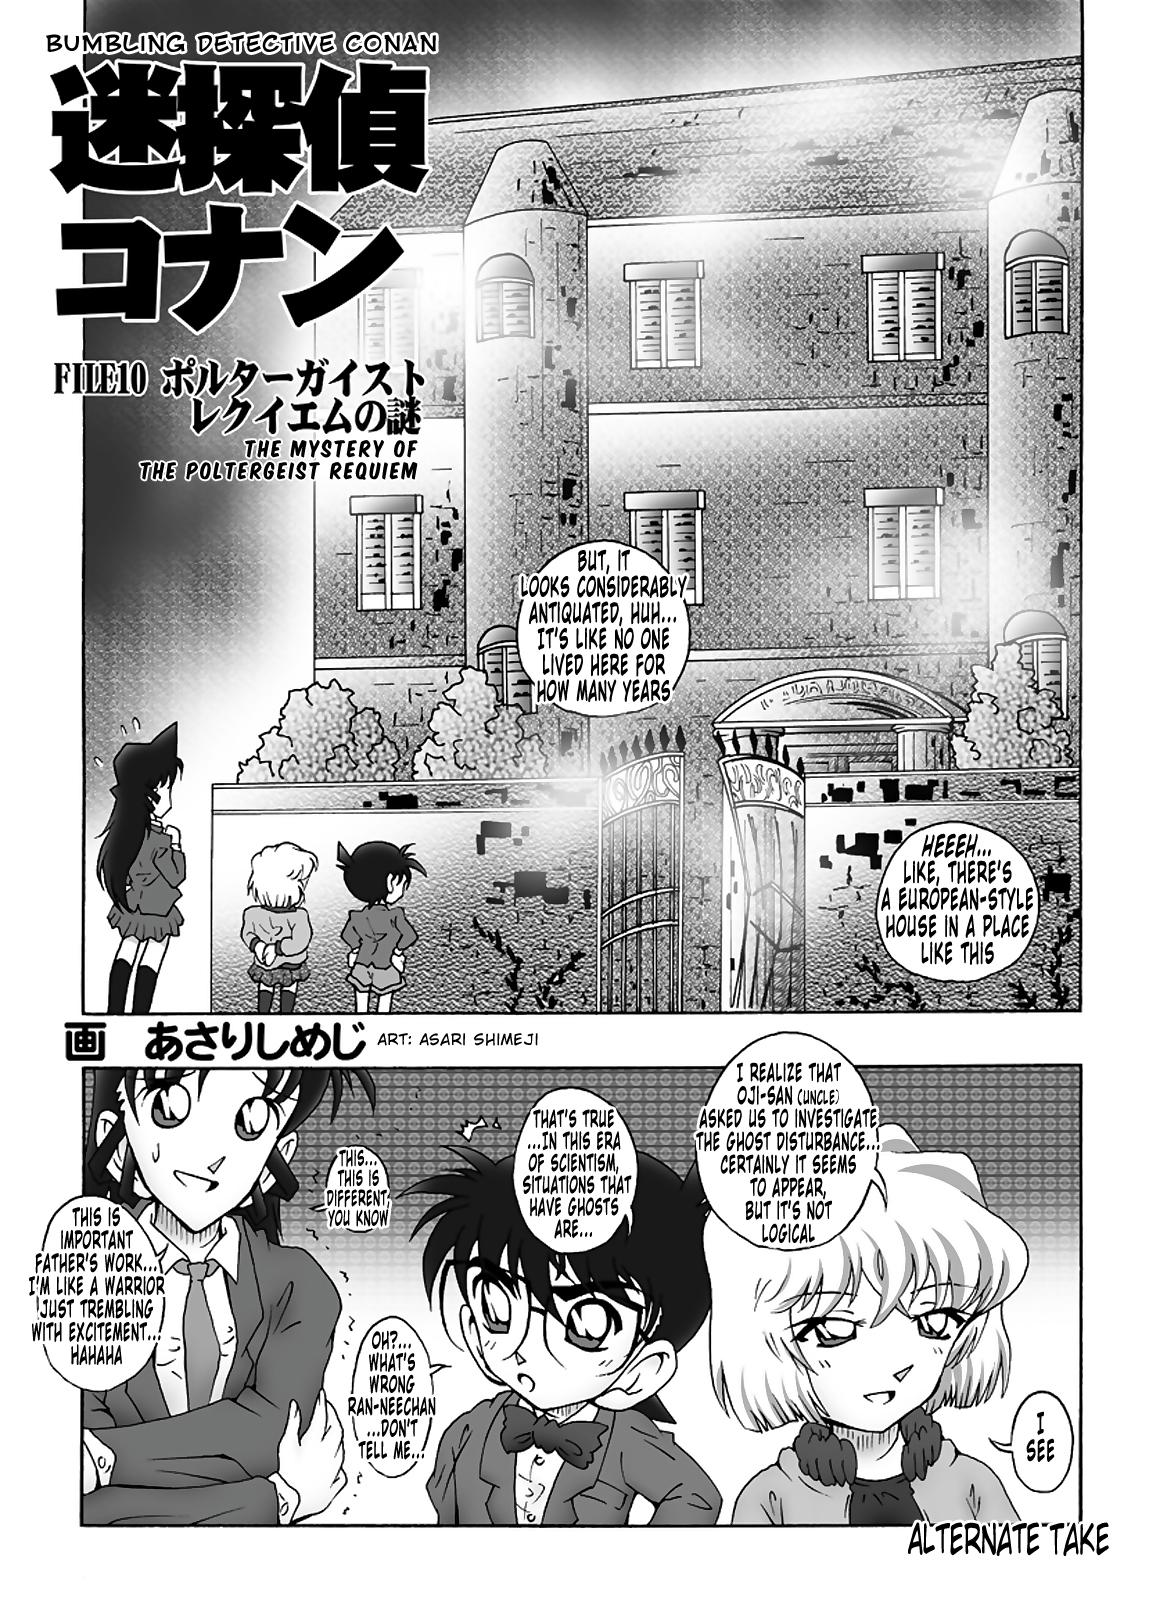 Bumbling Detective Conan - File 10: The Mystery Of The Poltergeist Requiem 22